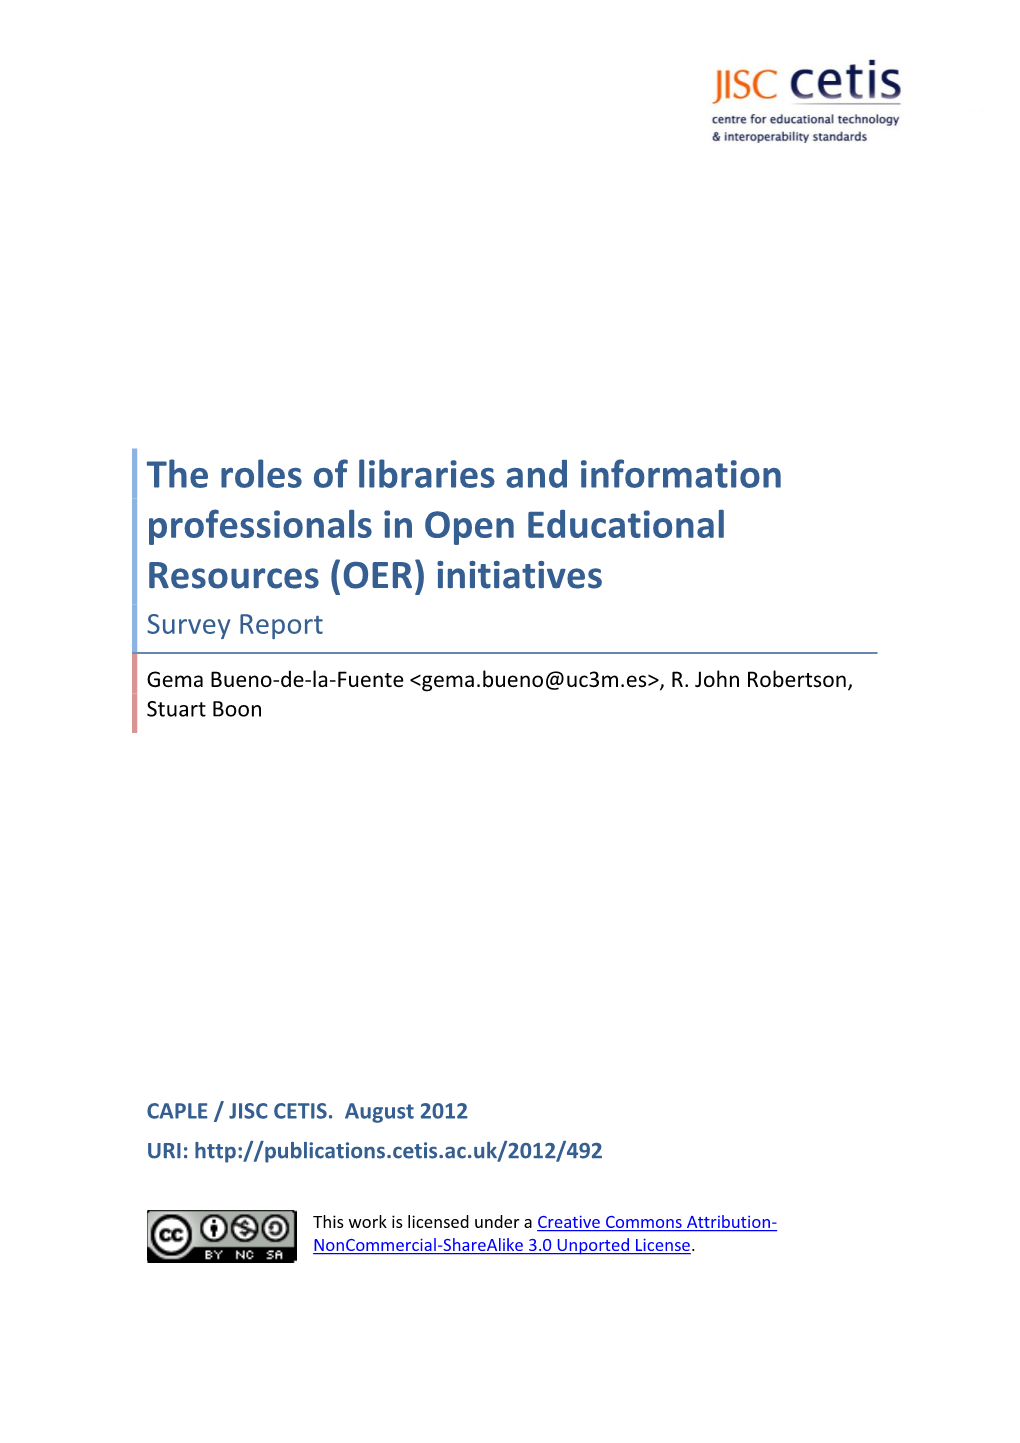 The Roles of Libraries and Information Professionals in OER Initiatives: Survey Report 3